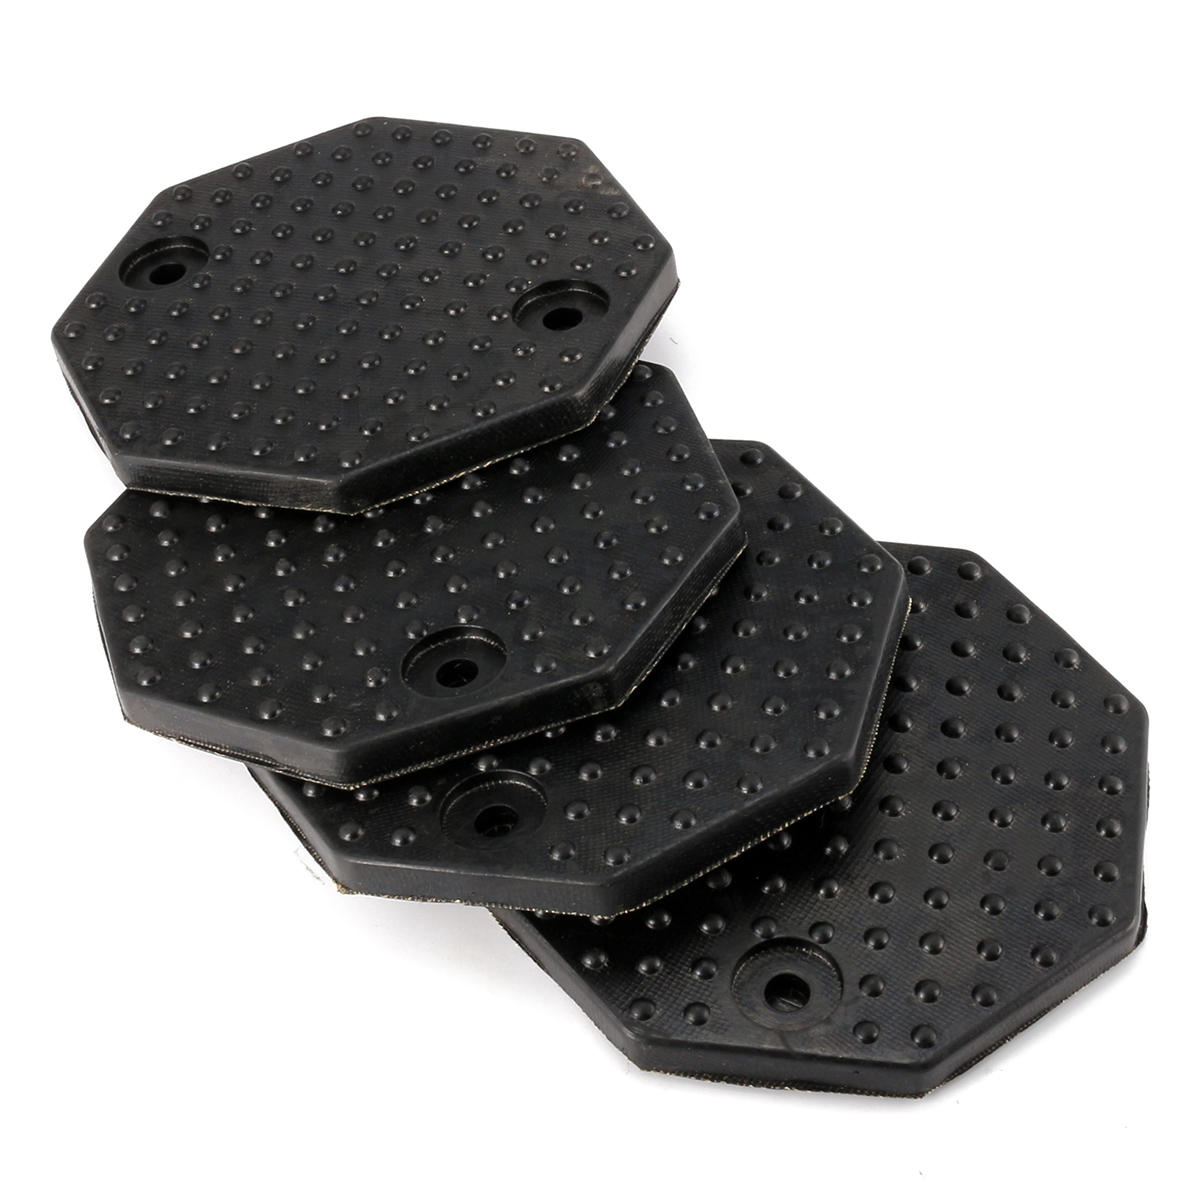 4PCS Octagon Rubber Arm Car Lift Tray Pad Accessories for Car Truck Substantial Rubber Mat